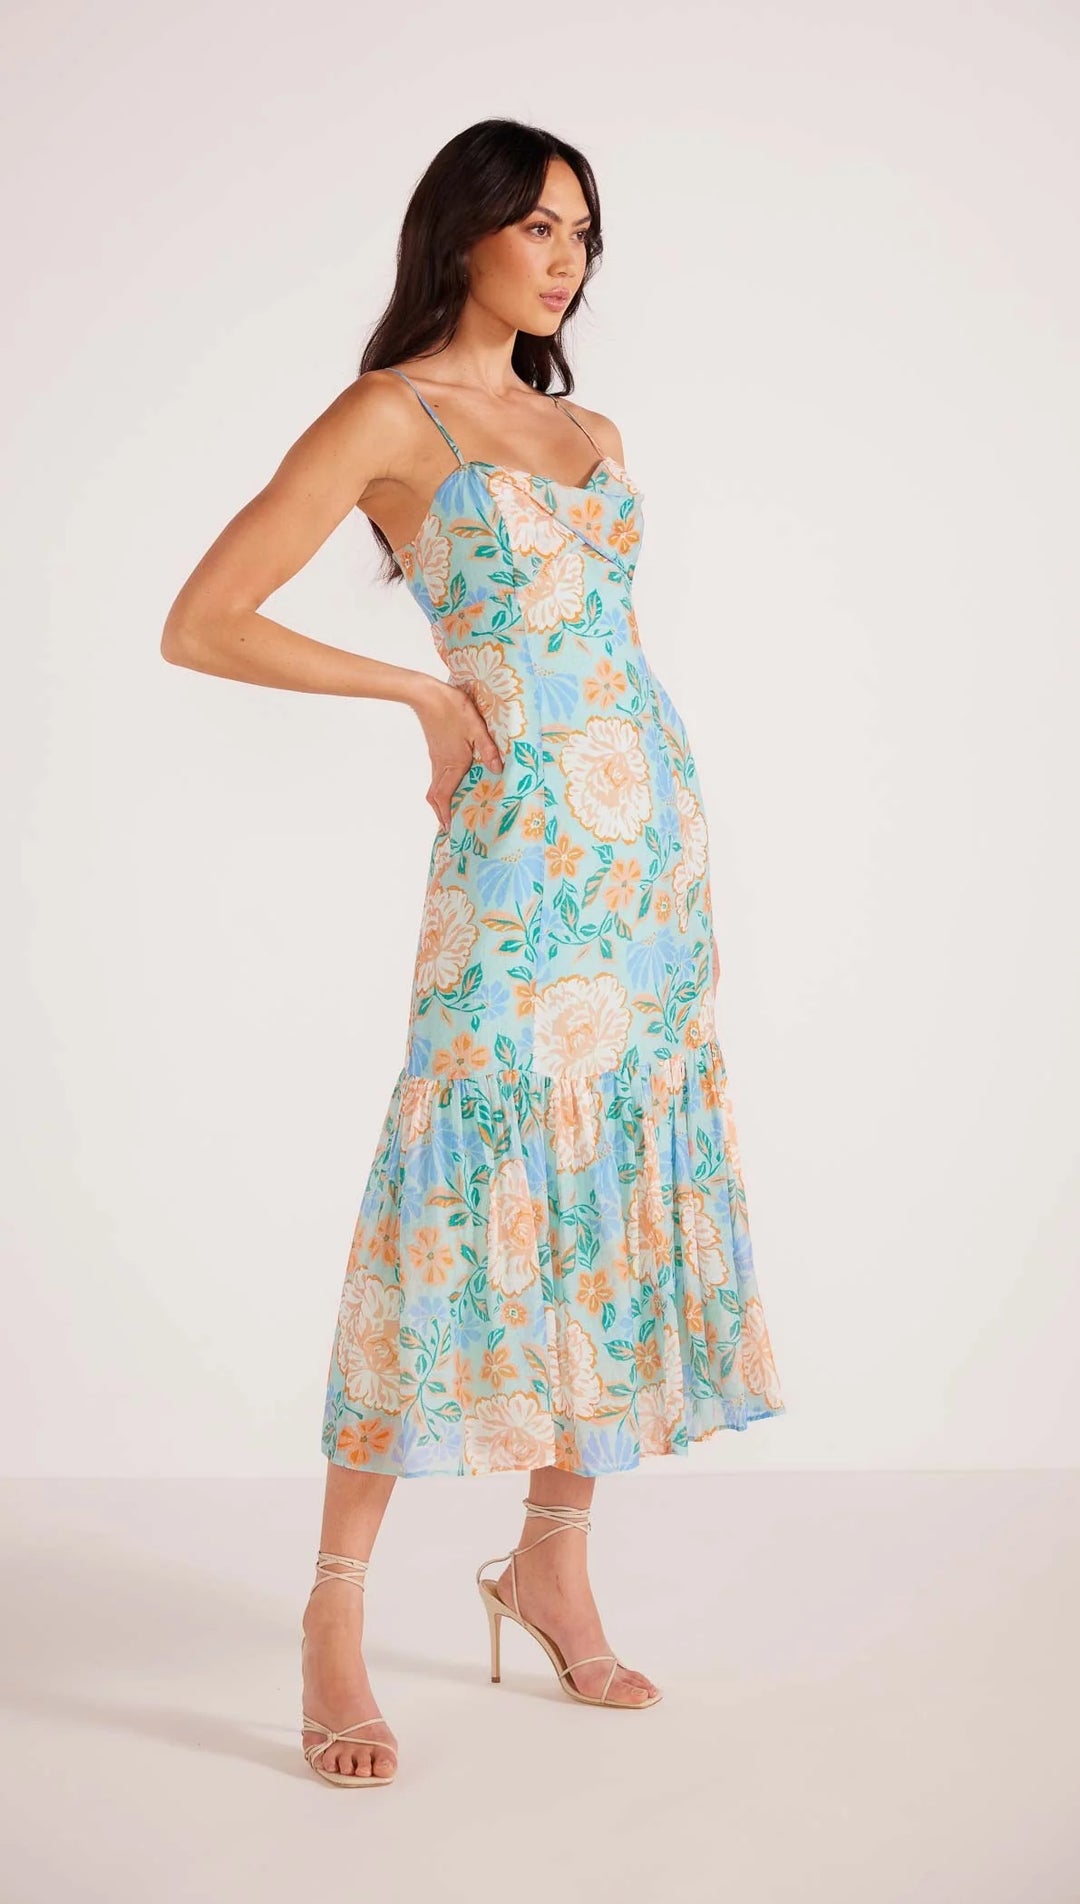 Evelyn Strappy Midaxi Dress - Mint/floral